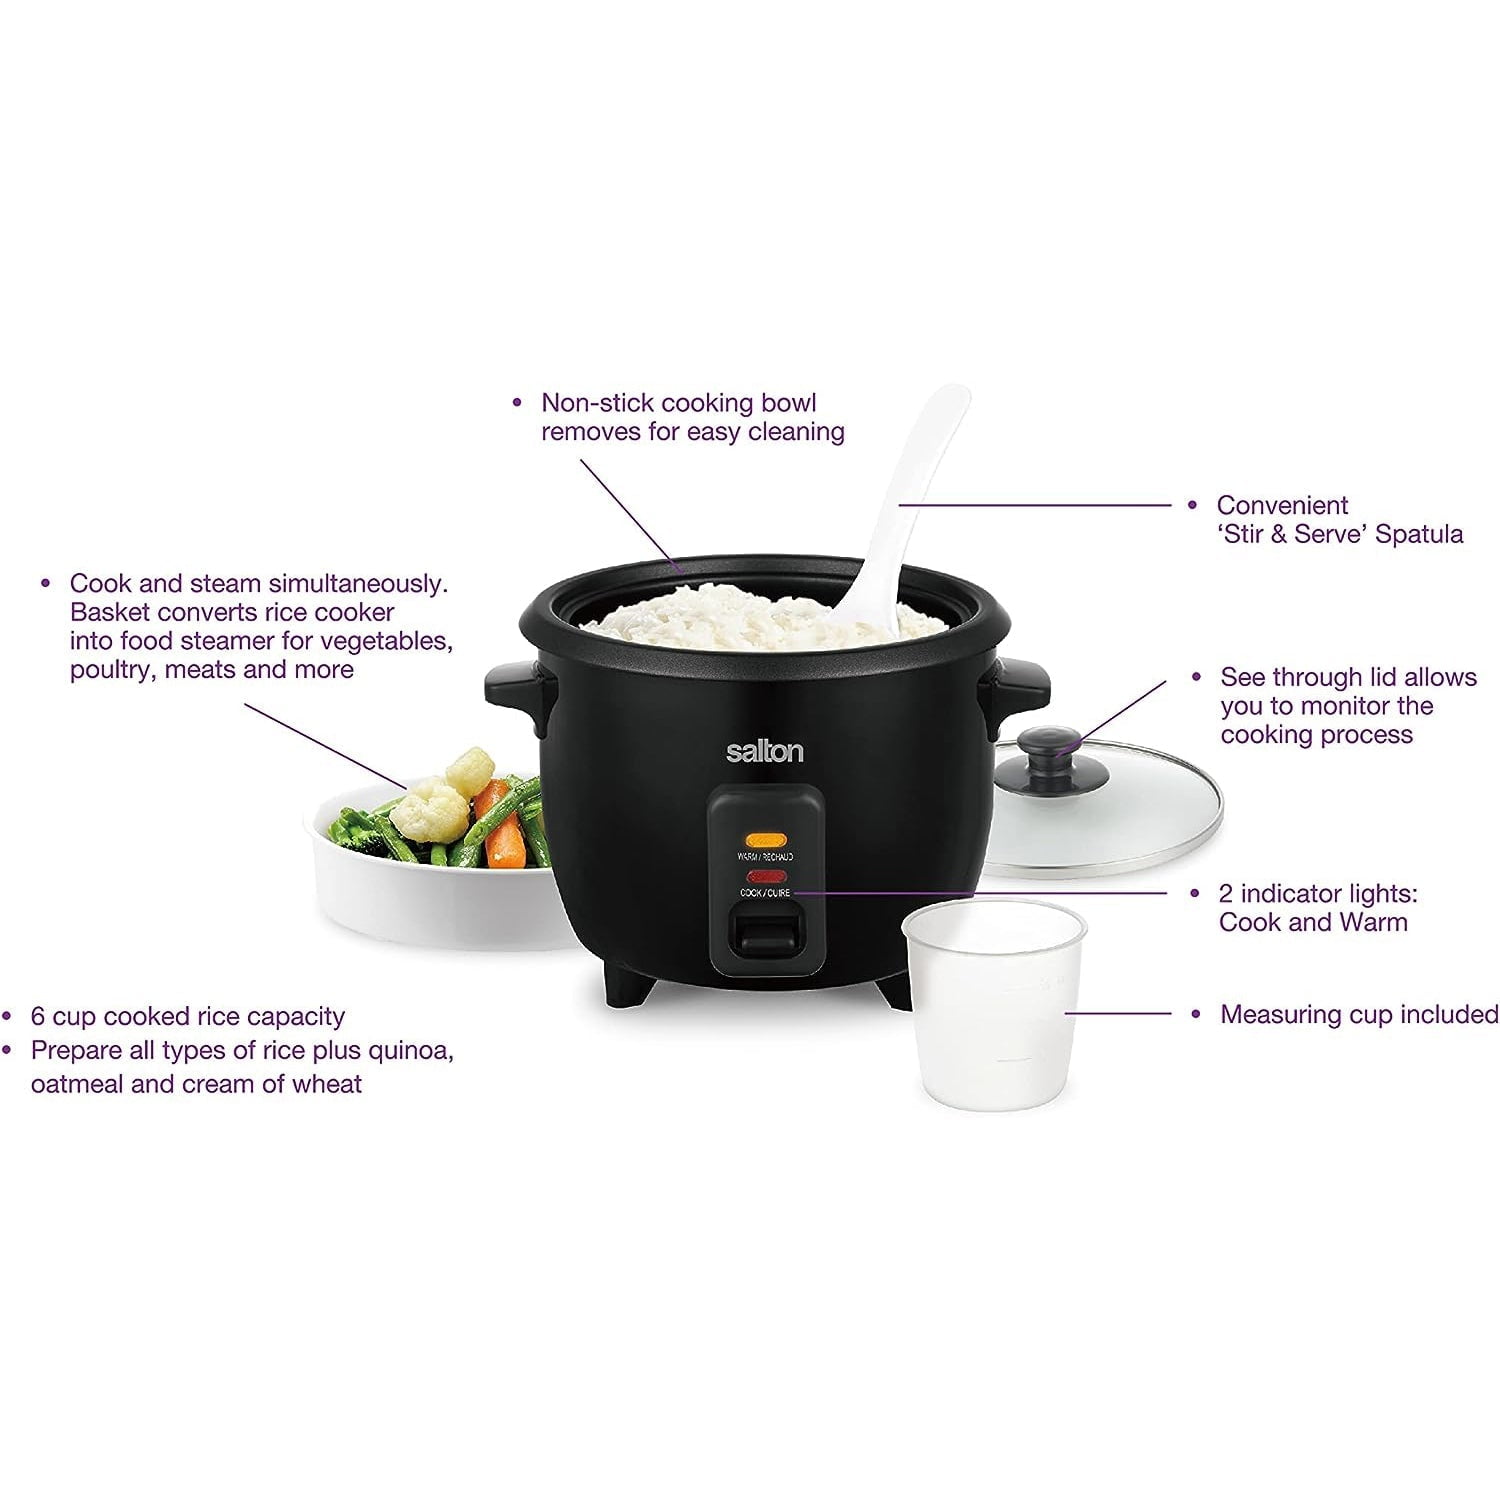 Waldorf 20 Cup Zojirushi Rice Cooker with Non Stick Inner Pan